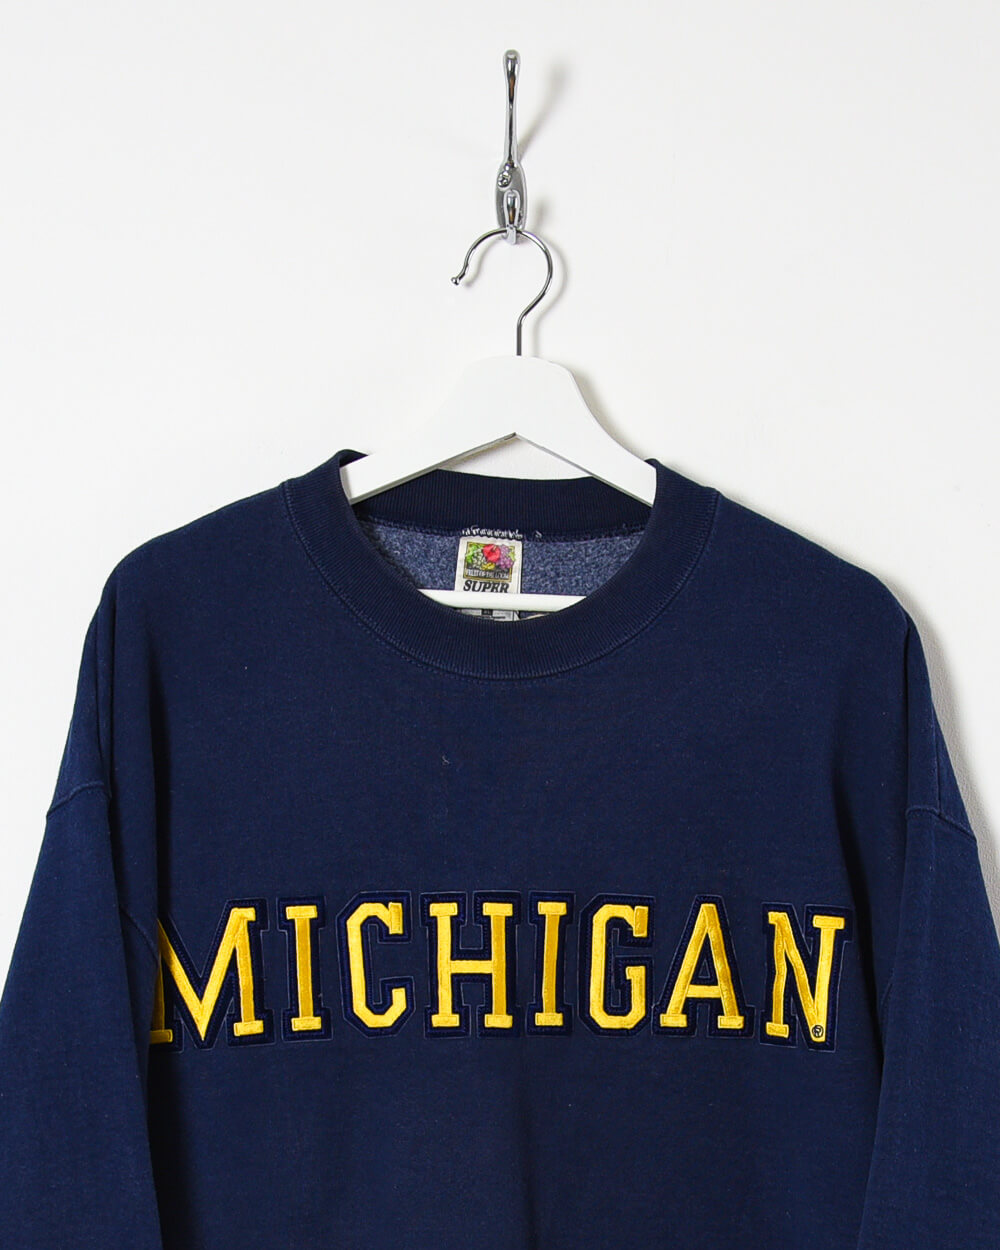 Fruit of The Loom Michigan Sweatshirt - X-Large - Domno Vintage 90s, 80s, 00s Retro and Vintage Clothing 